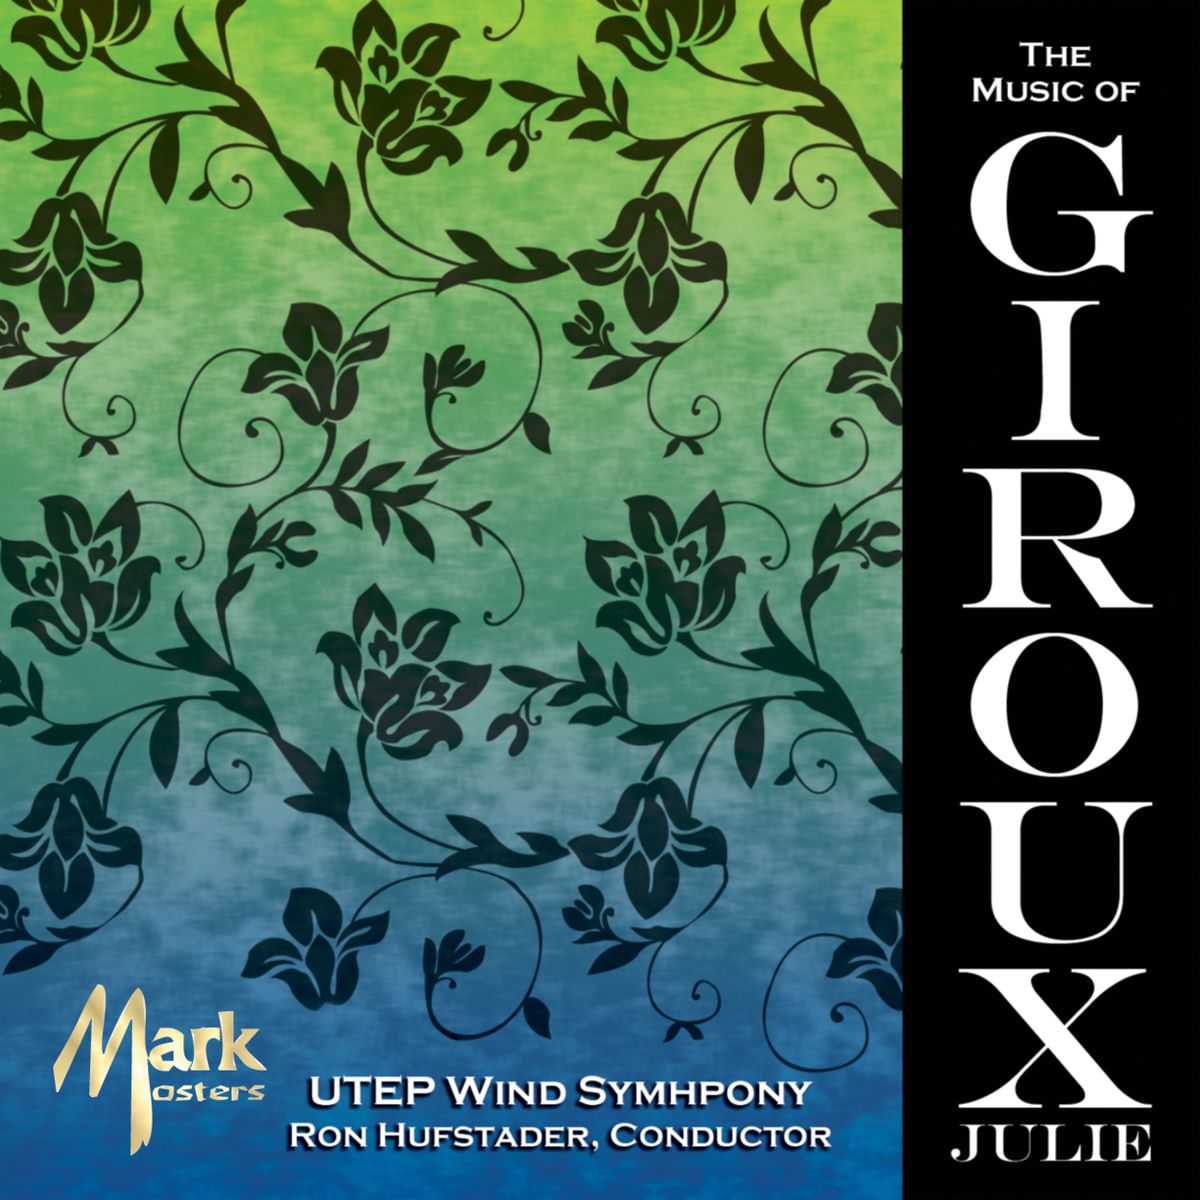 Music of Julie Giroux, The - click here